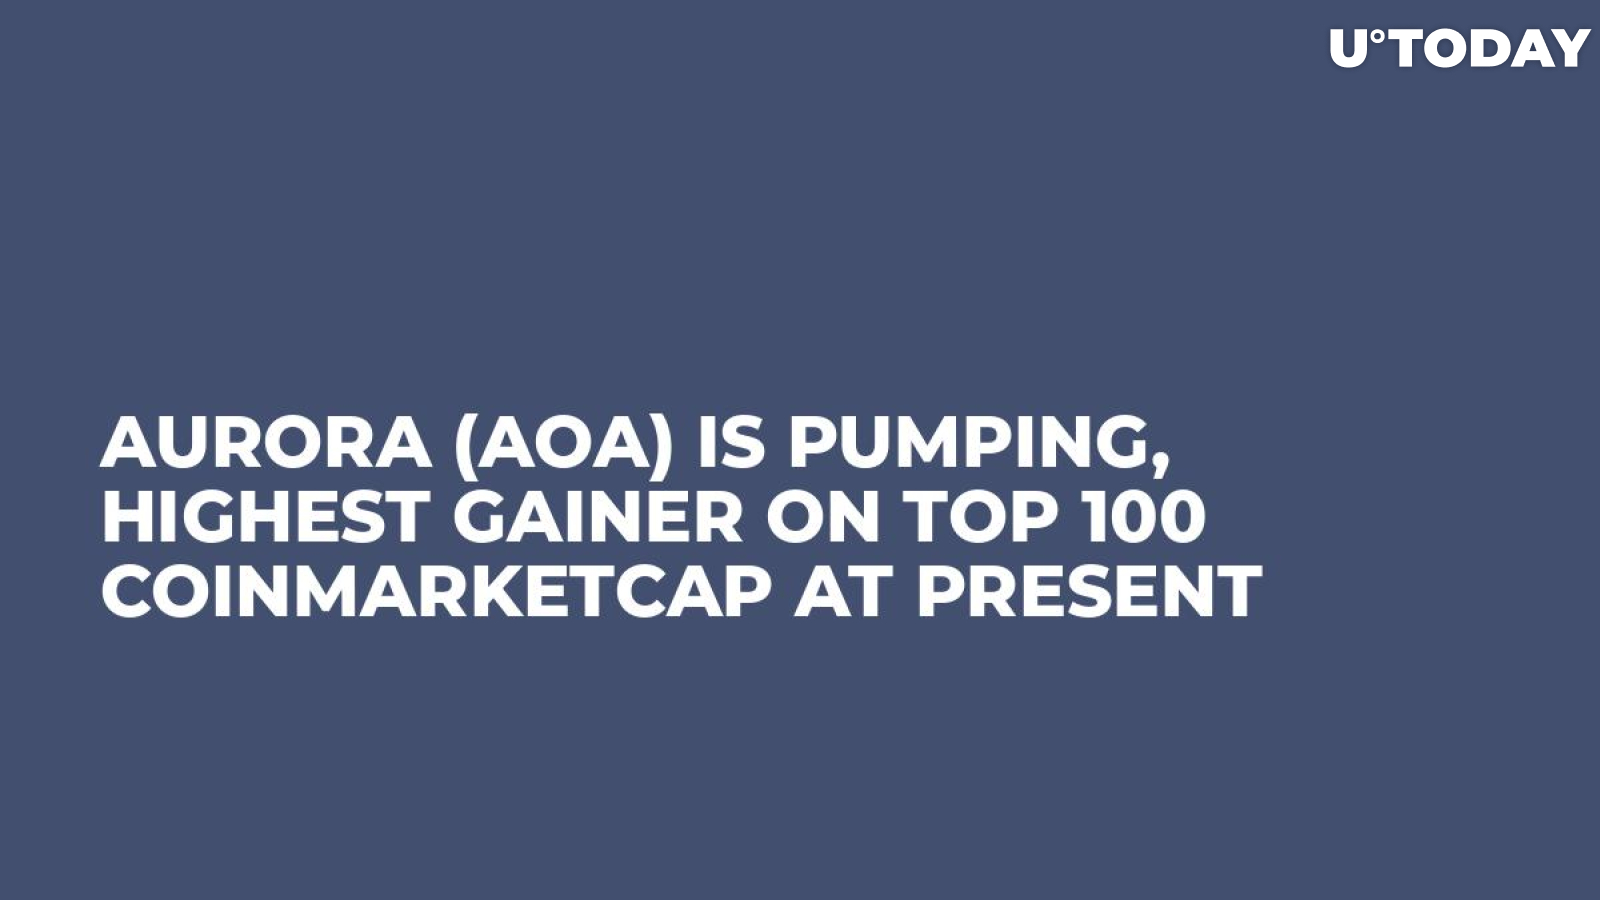 Aurora (AOA) Is Pumping, Highest Gainer on Top 100 CoinMarketCap at Present